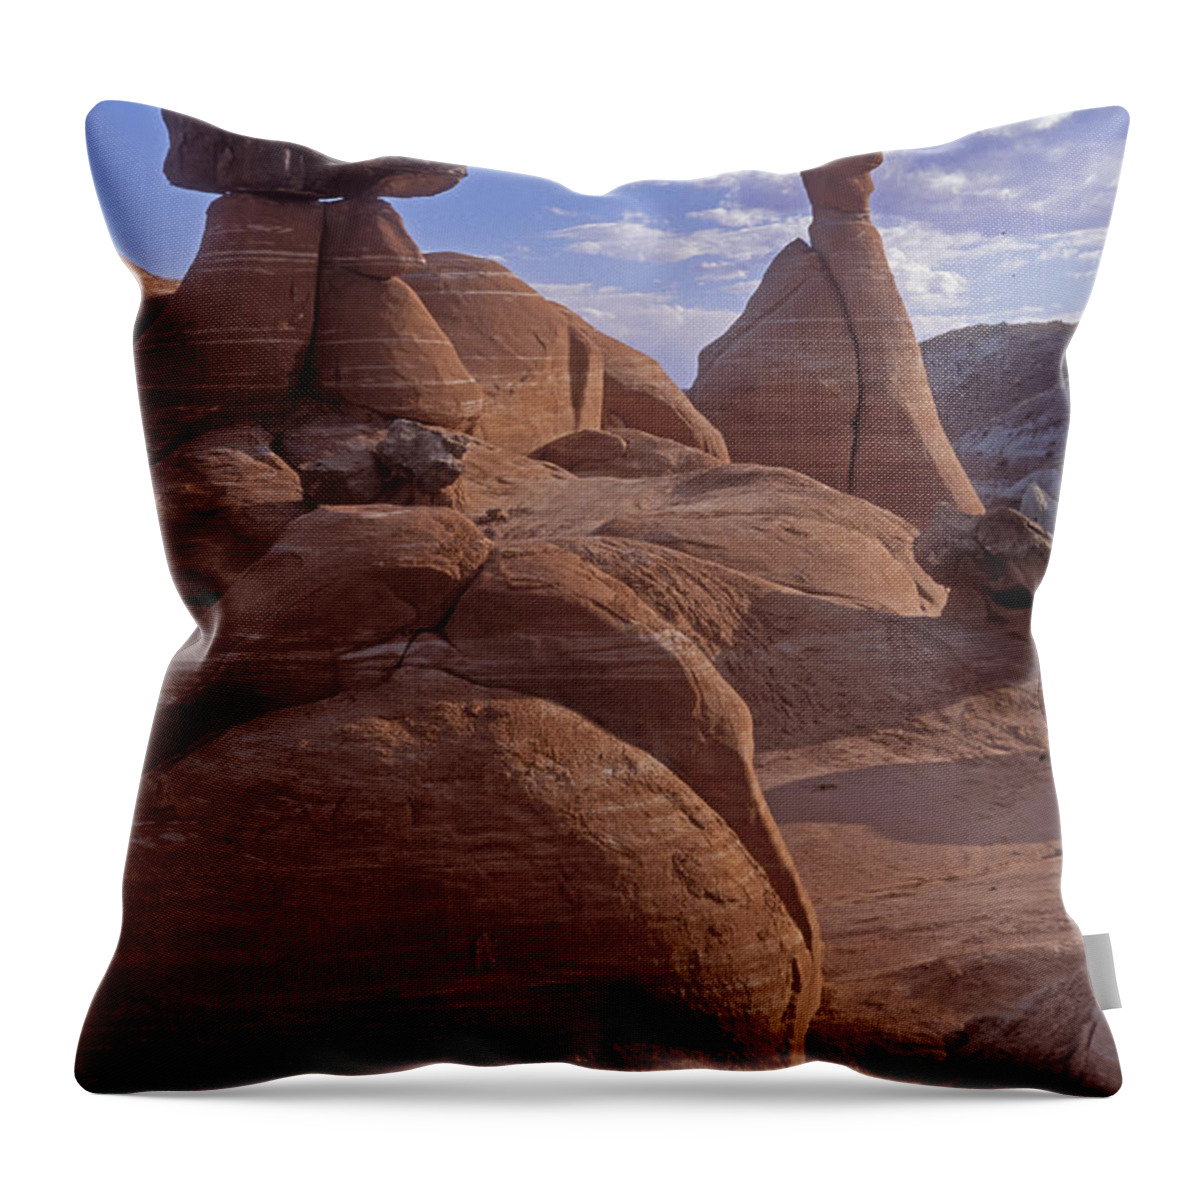 Southwest Throw Pillow featuring the photograph Paria Canyon Hoodoos by Sandra Bronstein